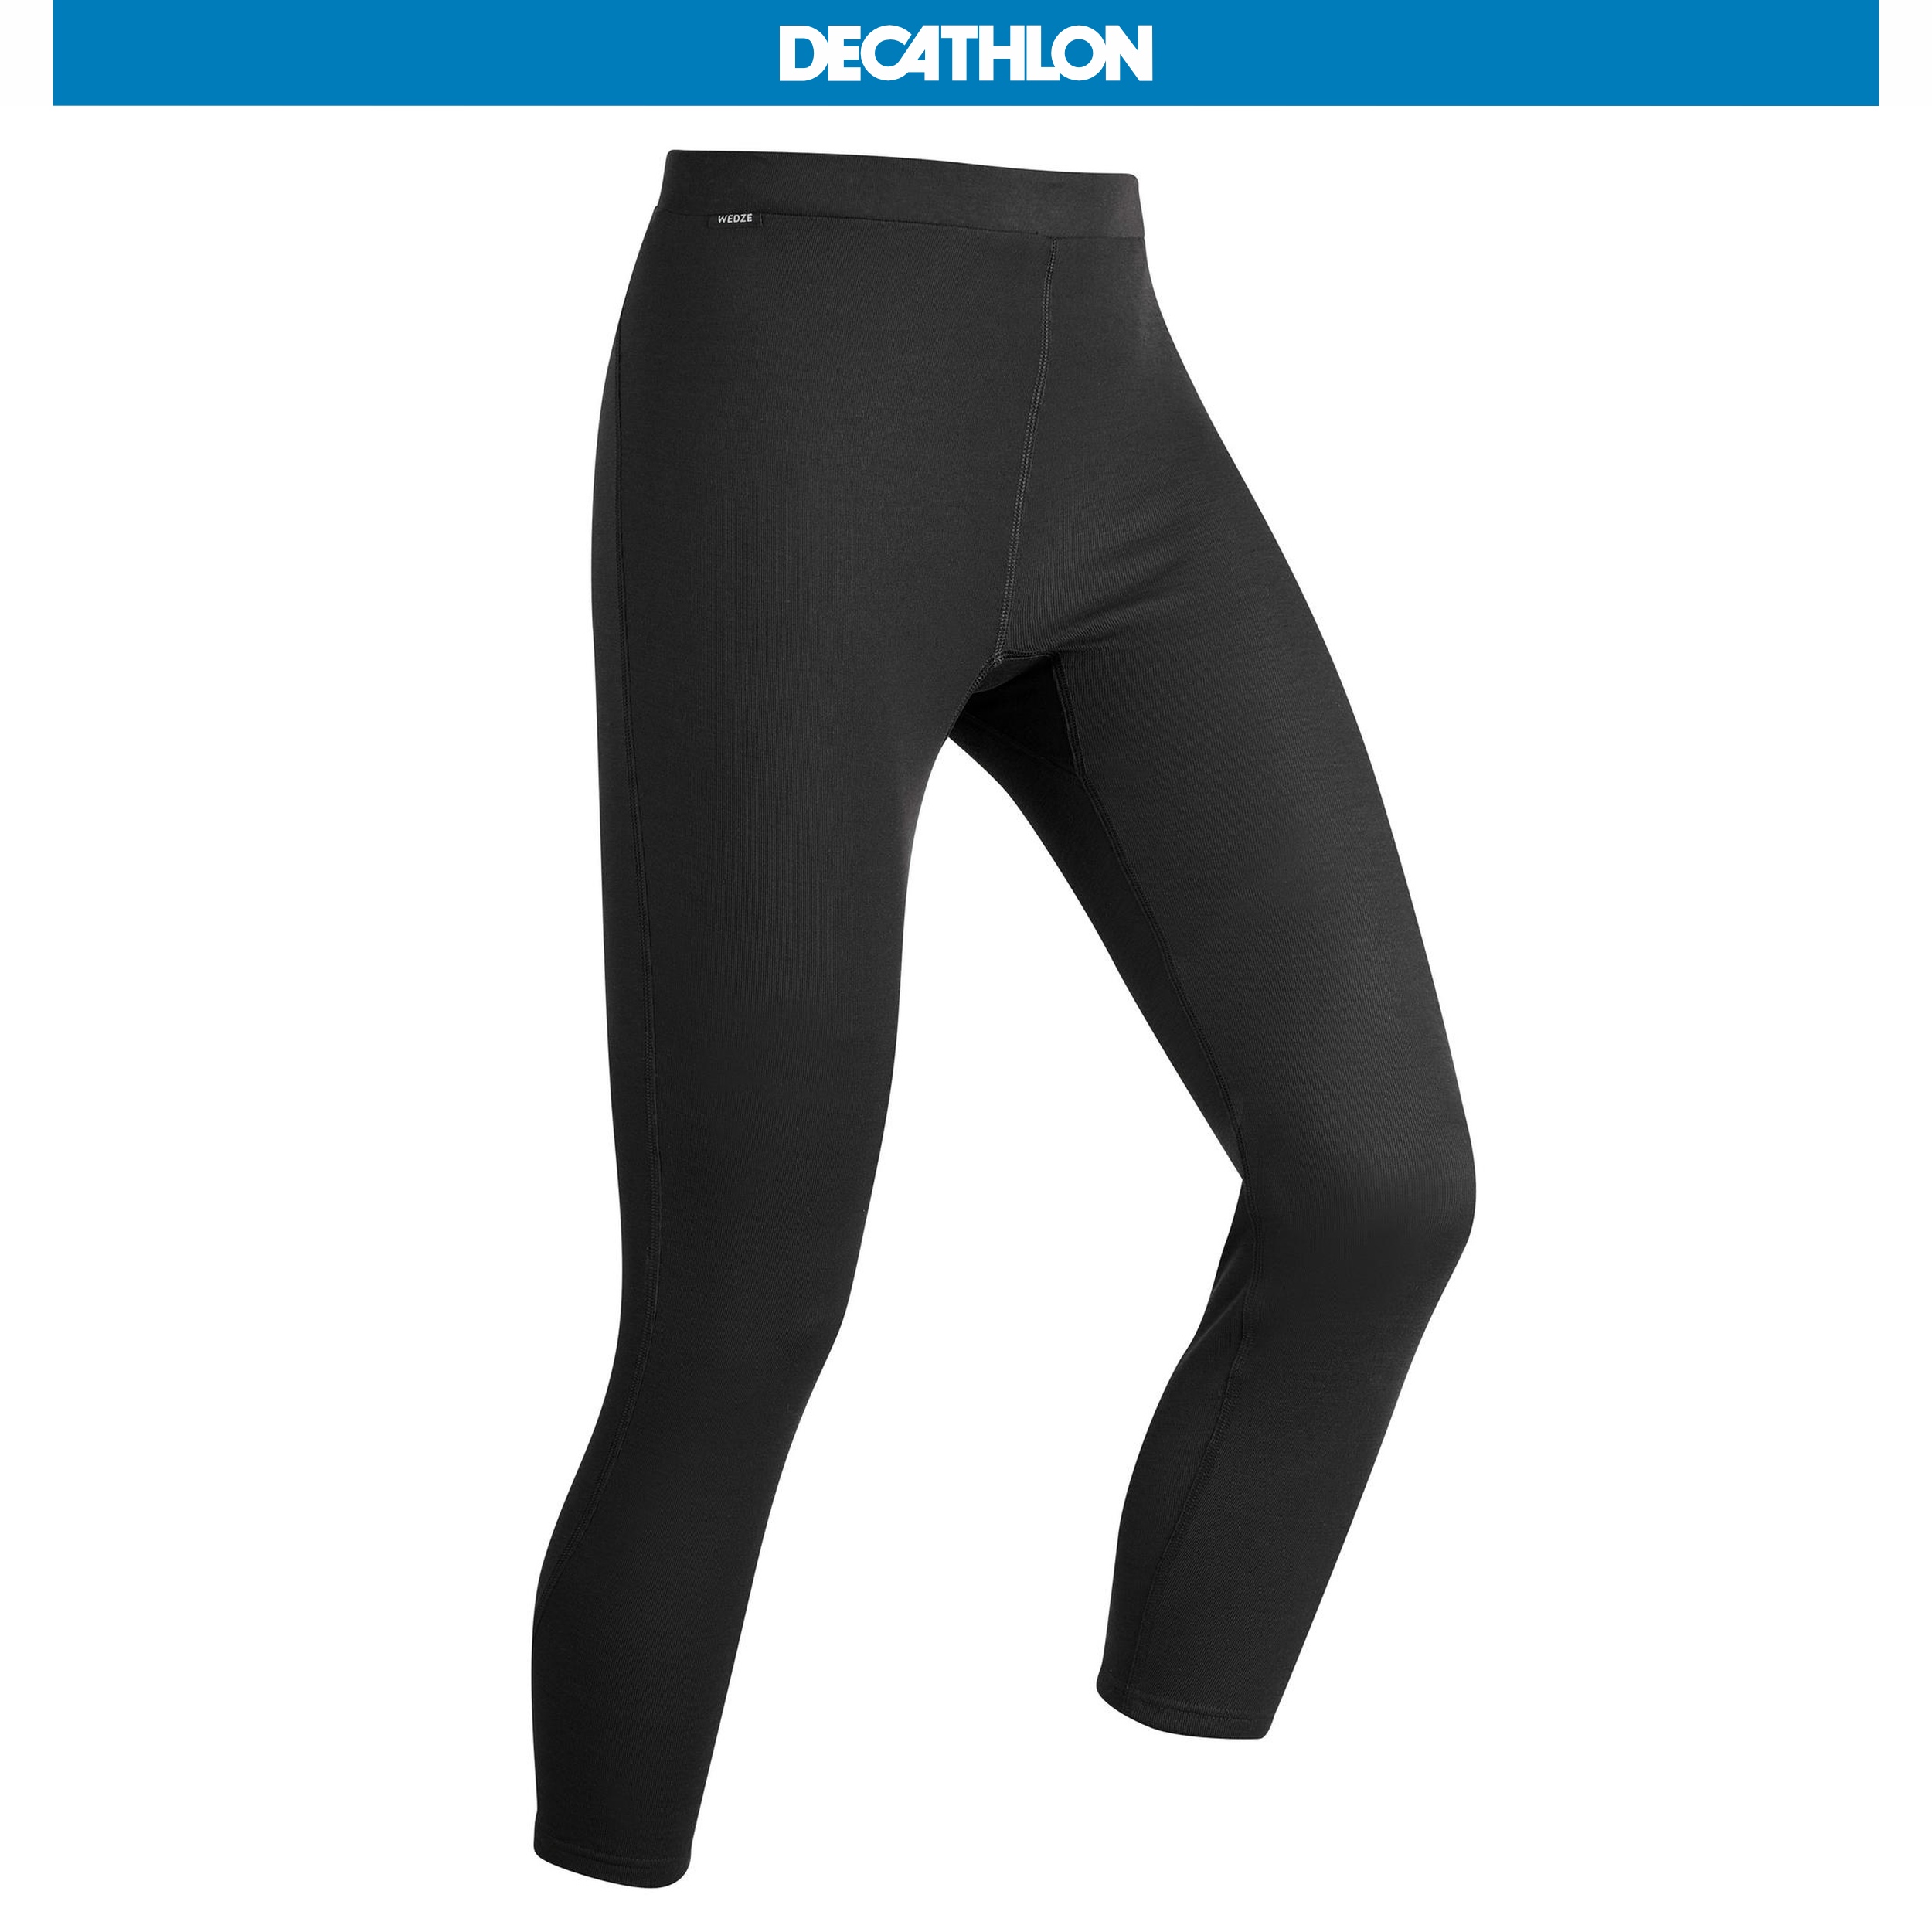 Mens Quick Dry Compression Leggings For Fitness, Running, Jogging, And  Workout Sportswear Decathlon Trousers For Training And Comfort Style X0824  From Fashion_official01, $9.24 | DHgate.Com